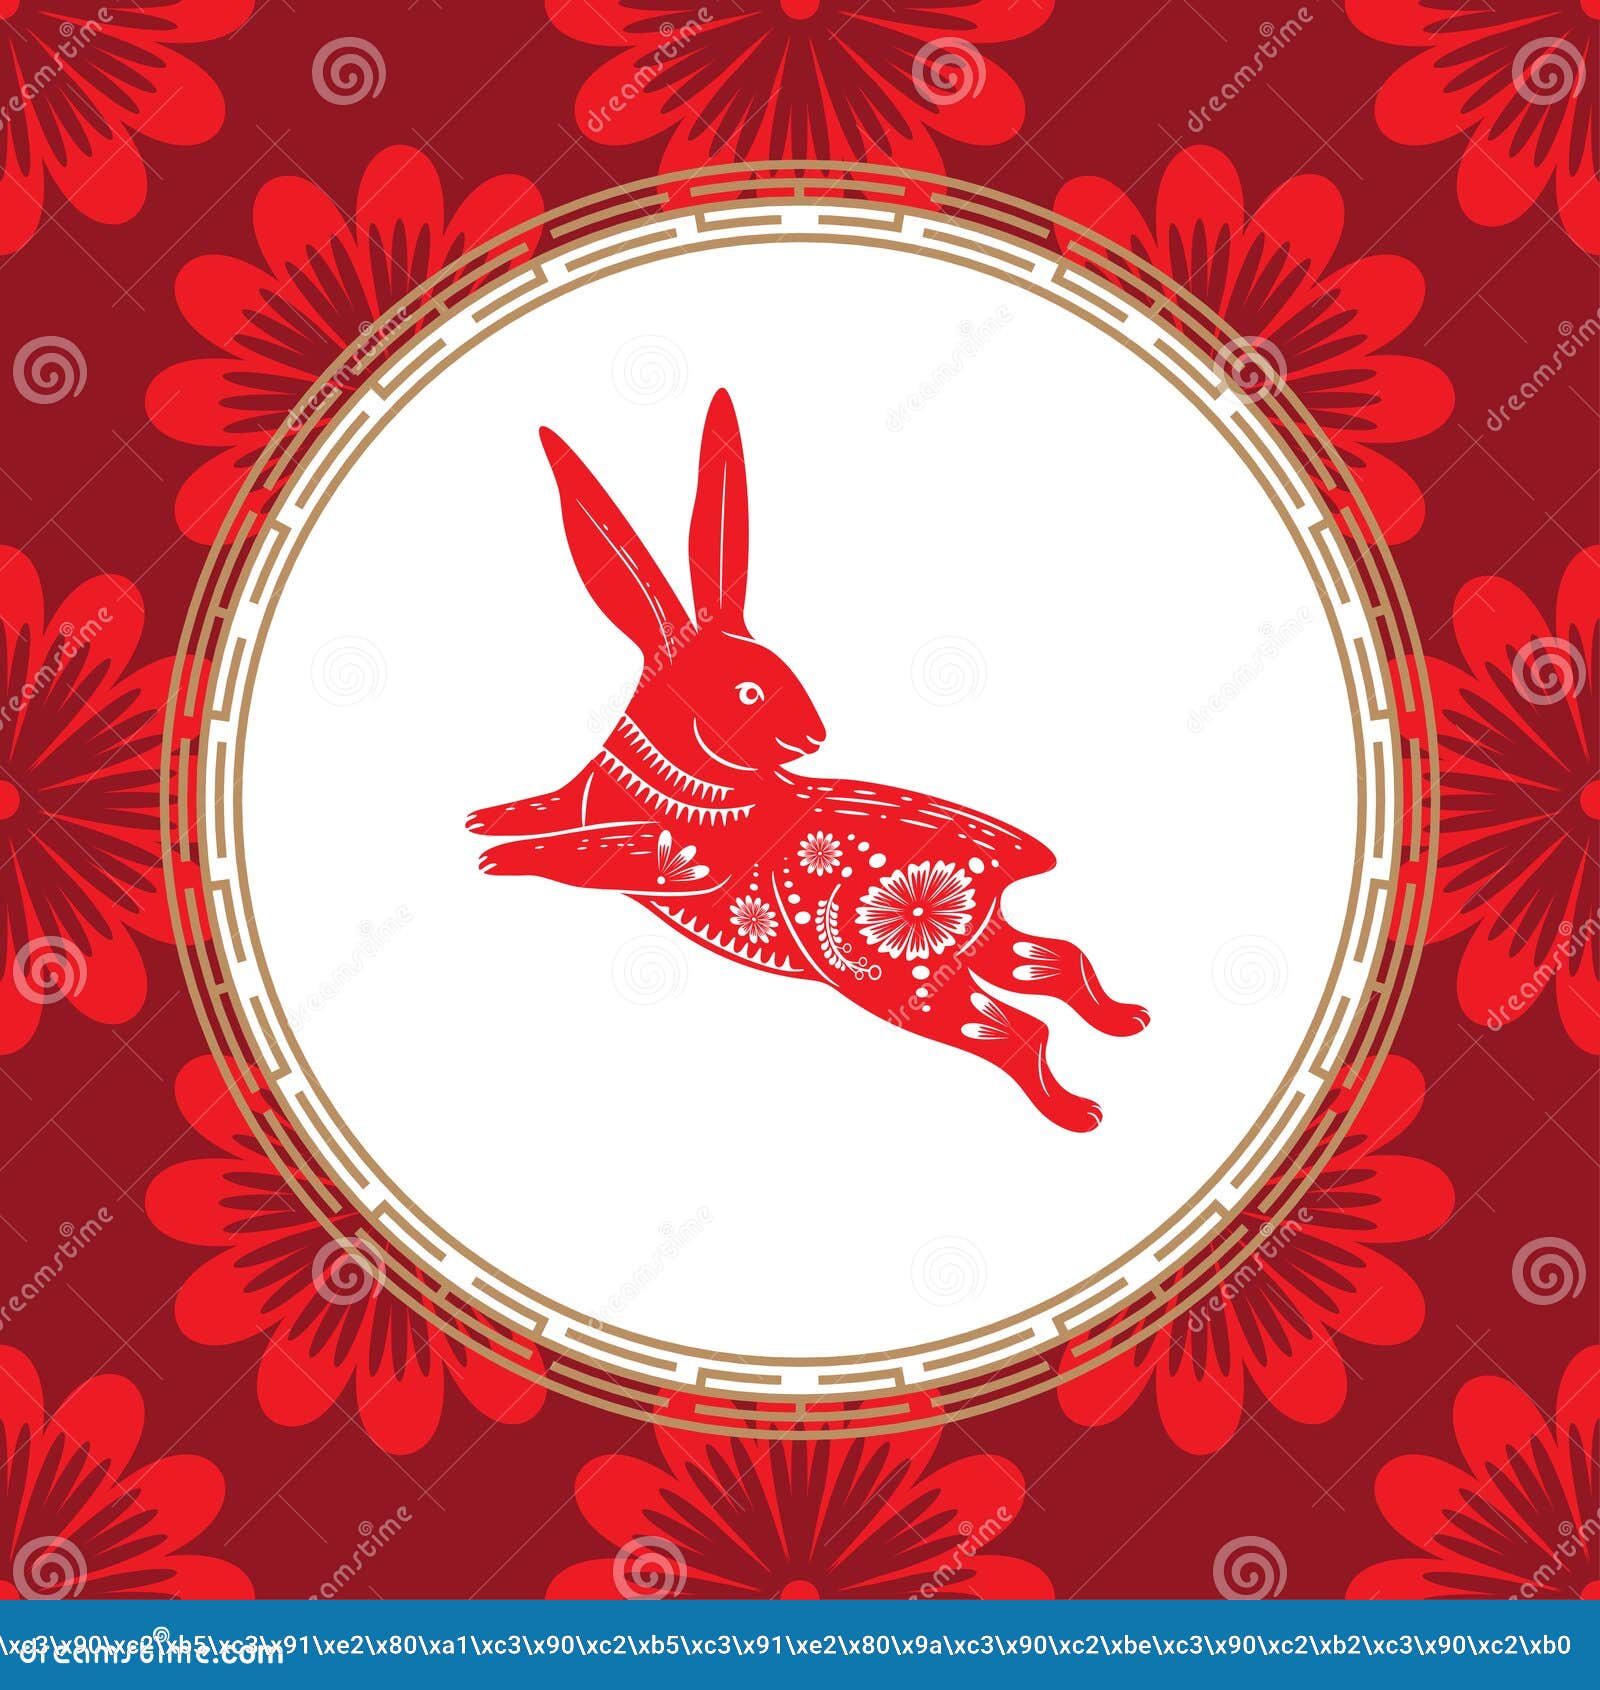 Chinese Zodiac Symbol of the Year of the Hare. Red Hare with White